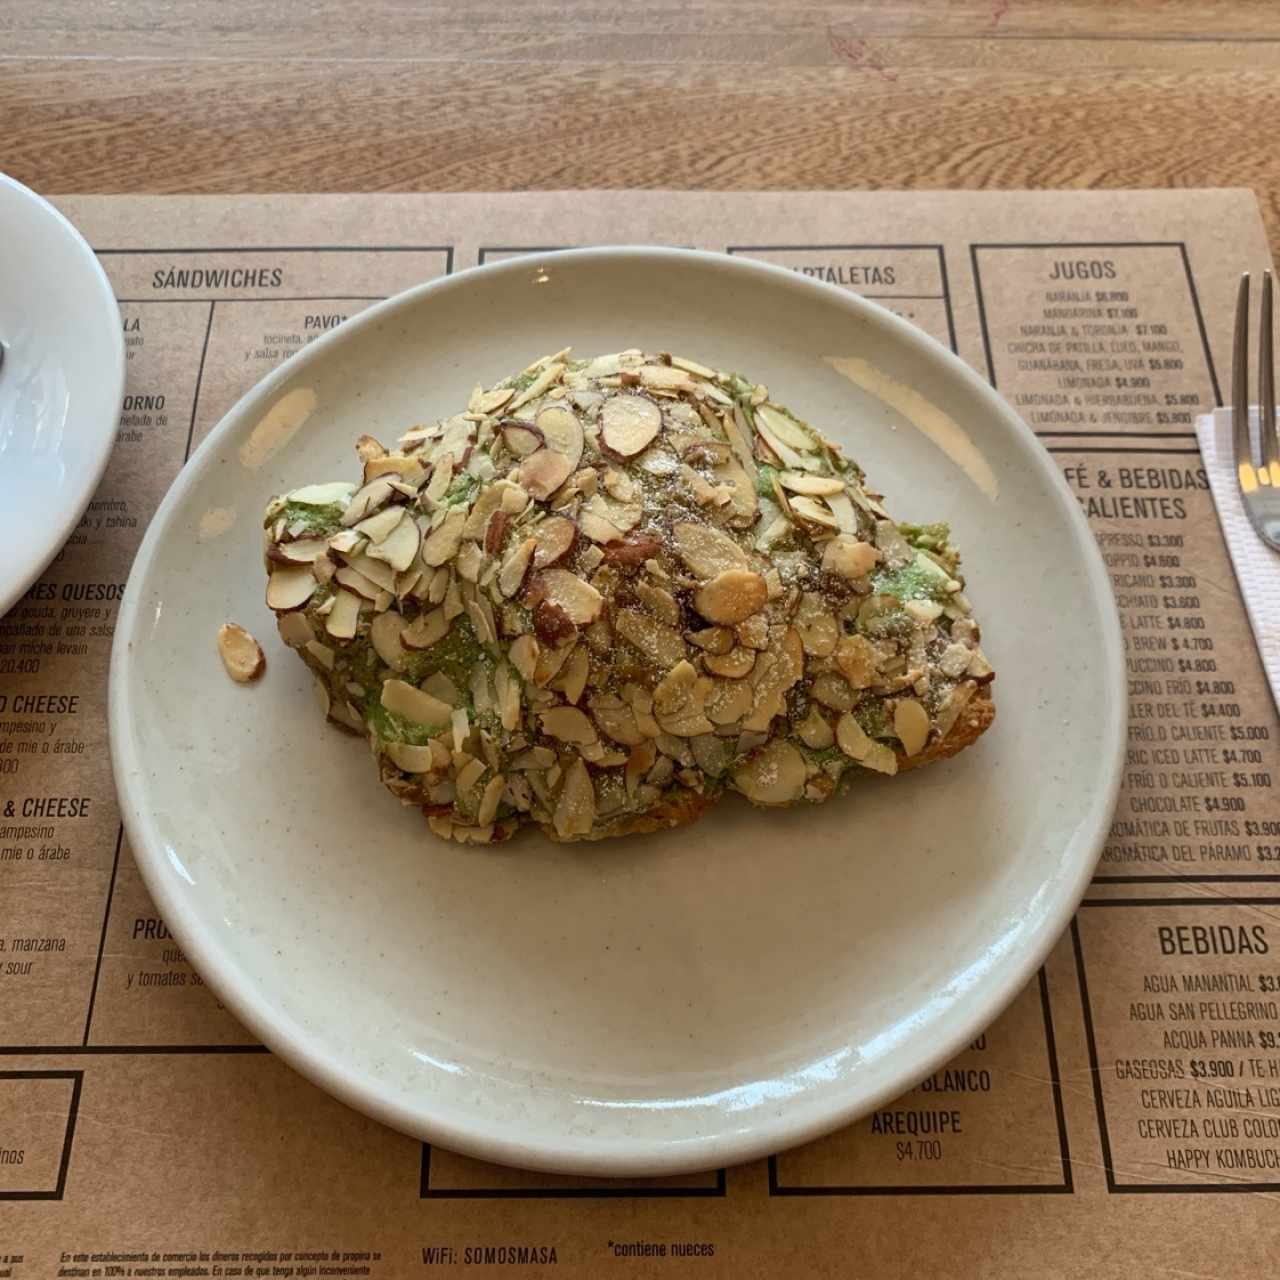 Croissant with almonds and pistachio